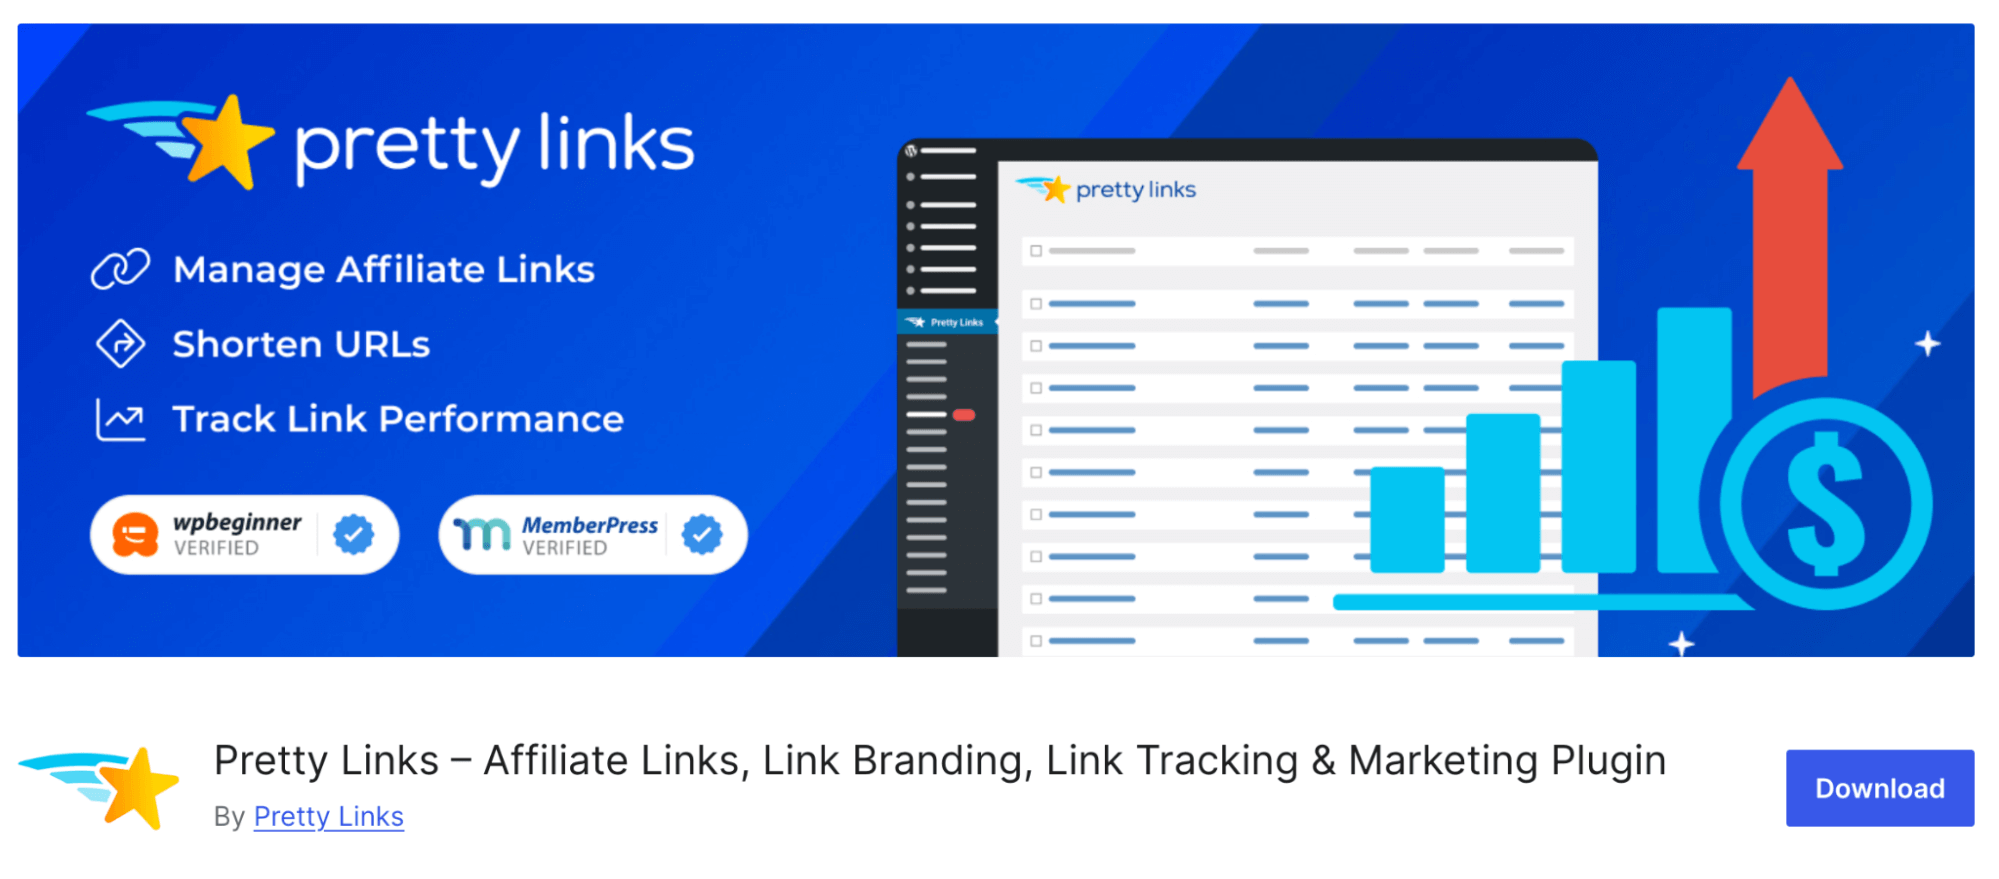 The image displays Pretty Links’ plug-in service on WordPress. The graphic demonstrates an increase of sales using their software for managing affiliate links, shortening URLs, and tracking link performance.